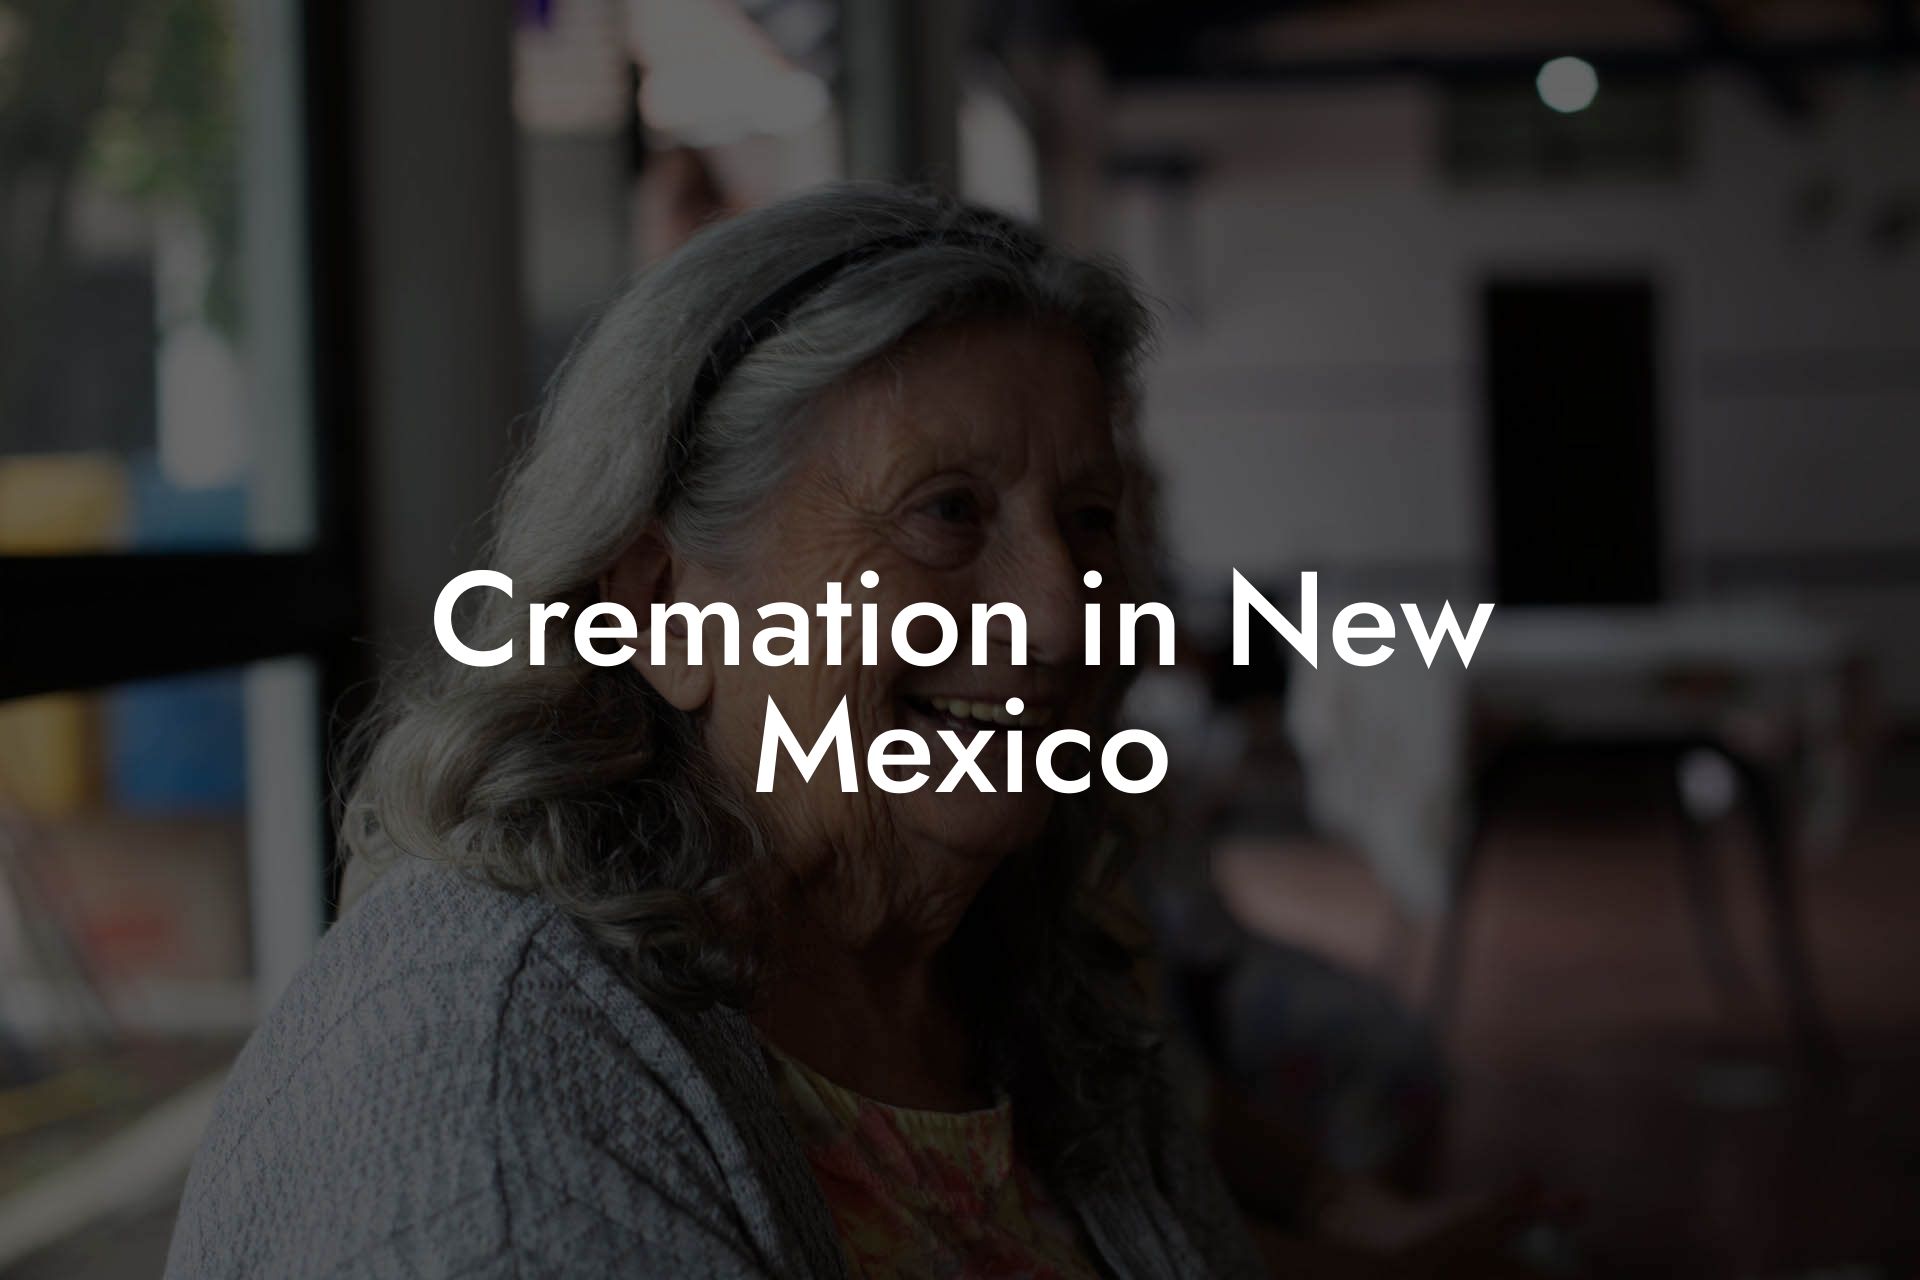 Cremation in New Mexico